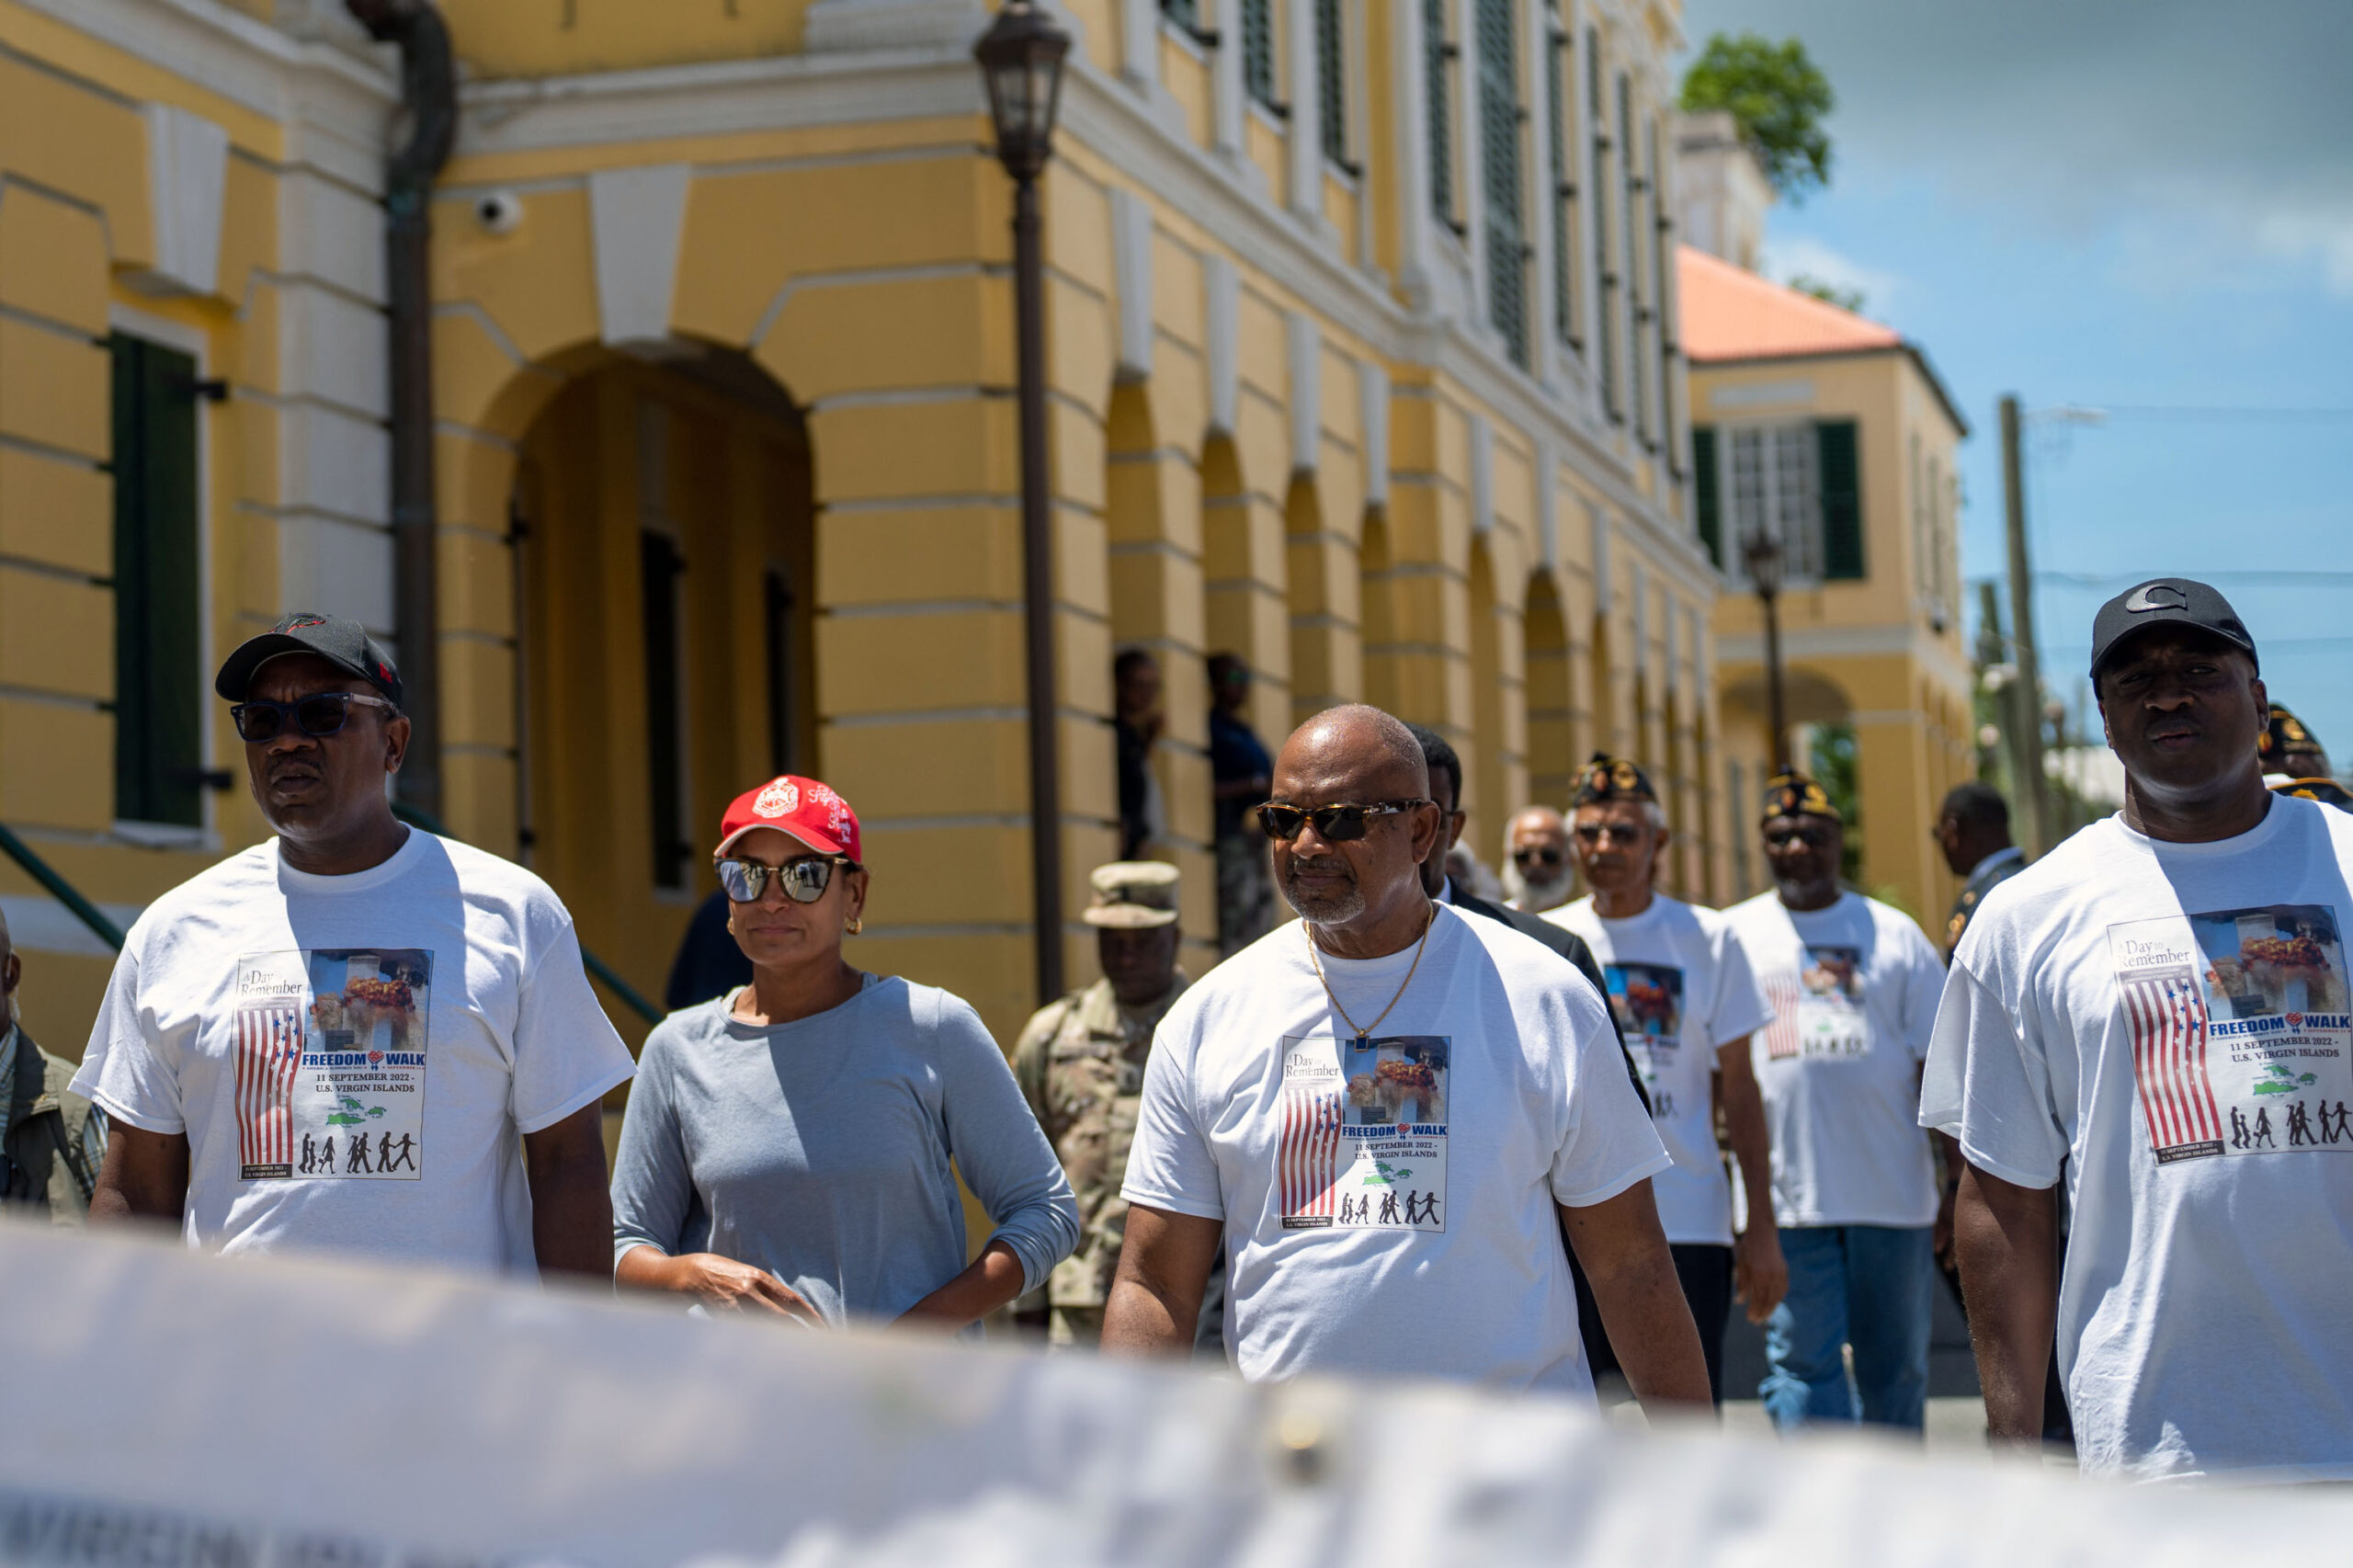 Gov. Albert Bryan Jr., First Lady Yolanda Bryan, and Lt. Gov. Tregenza Roach, from left, participate in a Patriot Day parade on Sunday in Christiansted, St. Croix. (Government House photo)